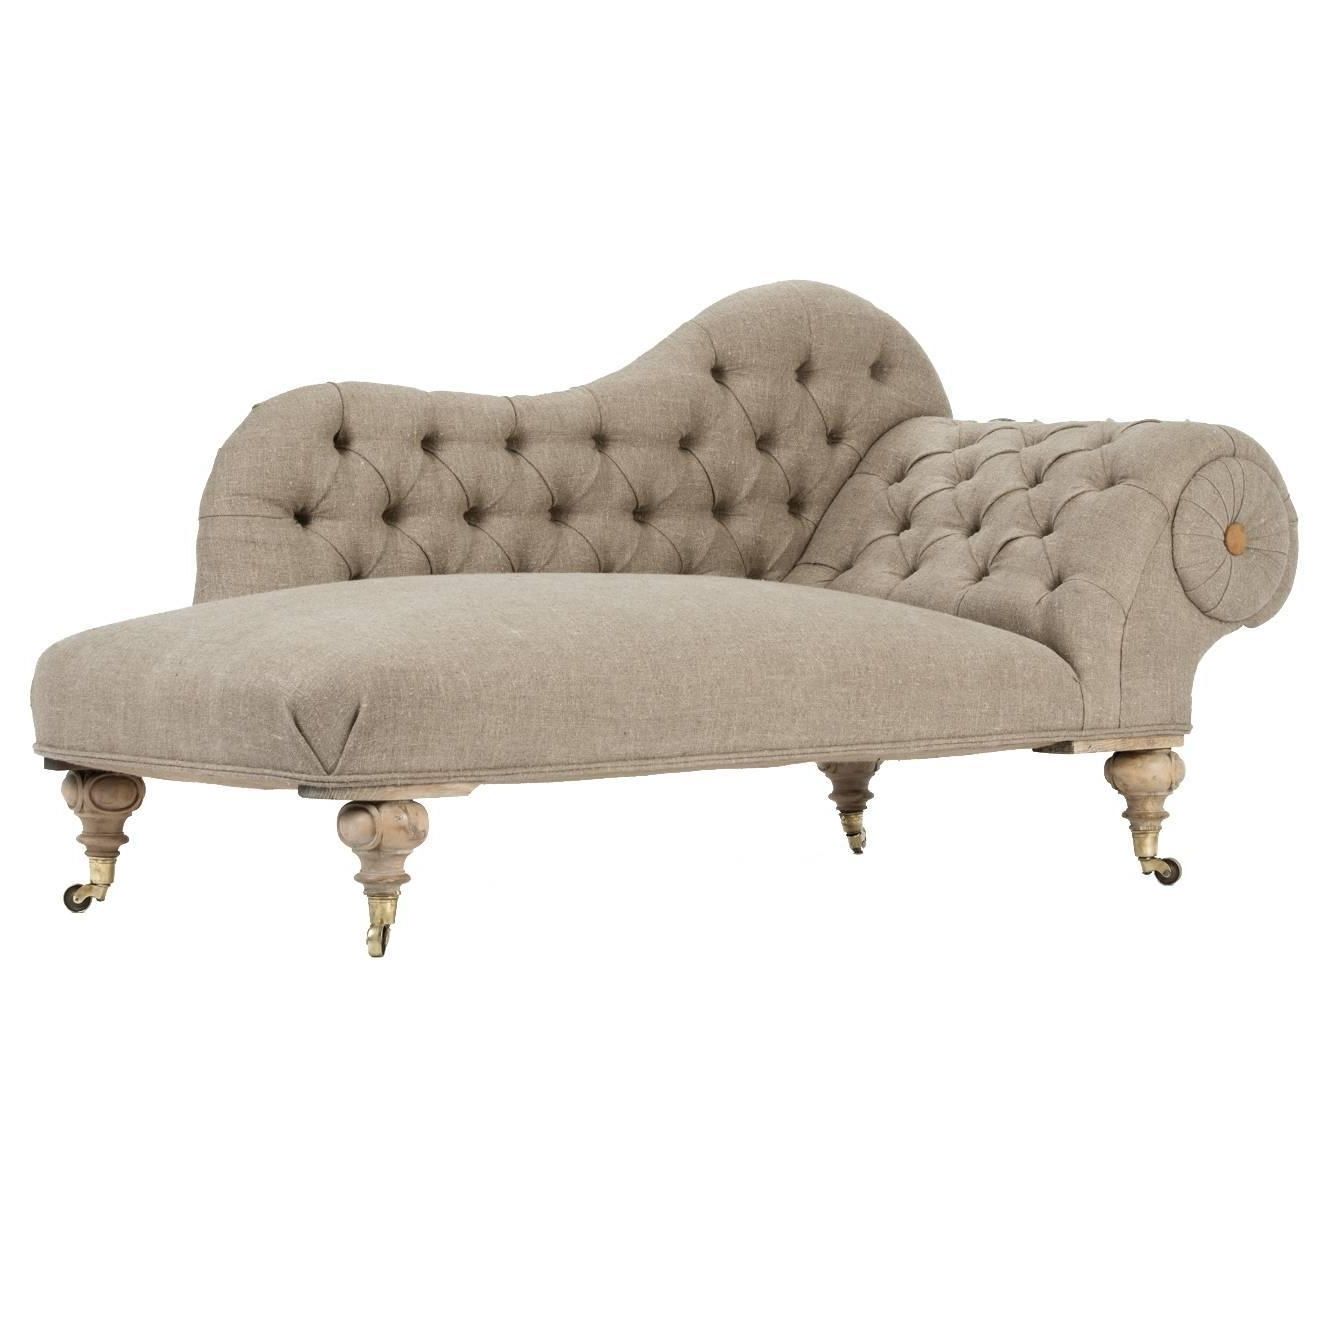 Eclectic Late Victorian Scroll Arm Tufted Chaise Longue In Organic Pertaining To Recent Tufted Chaises (View 12 of 15)